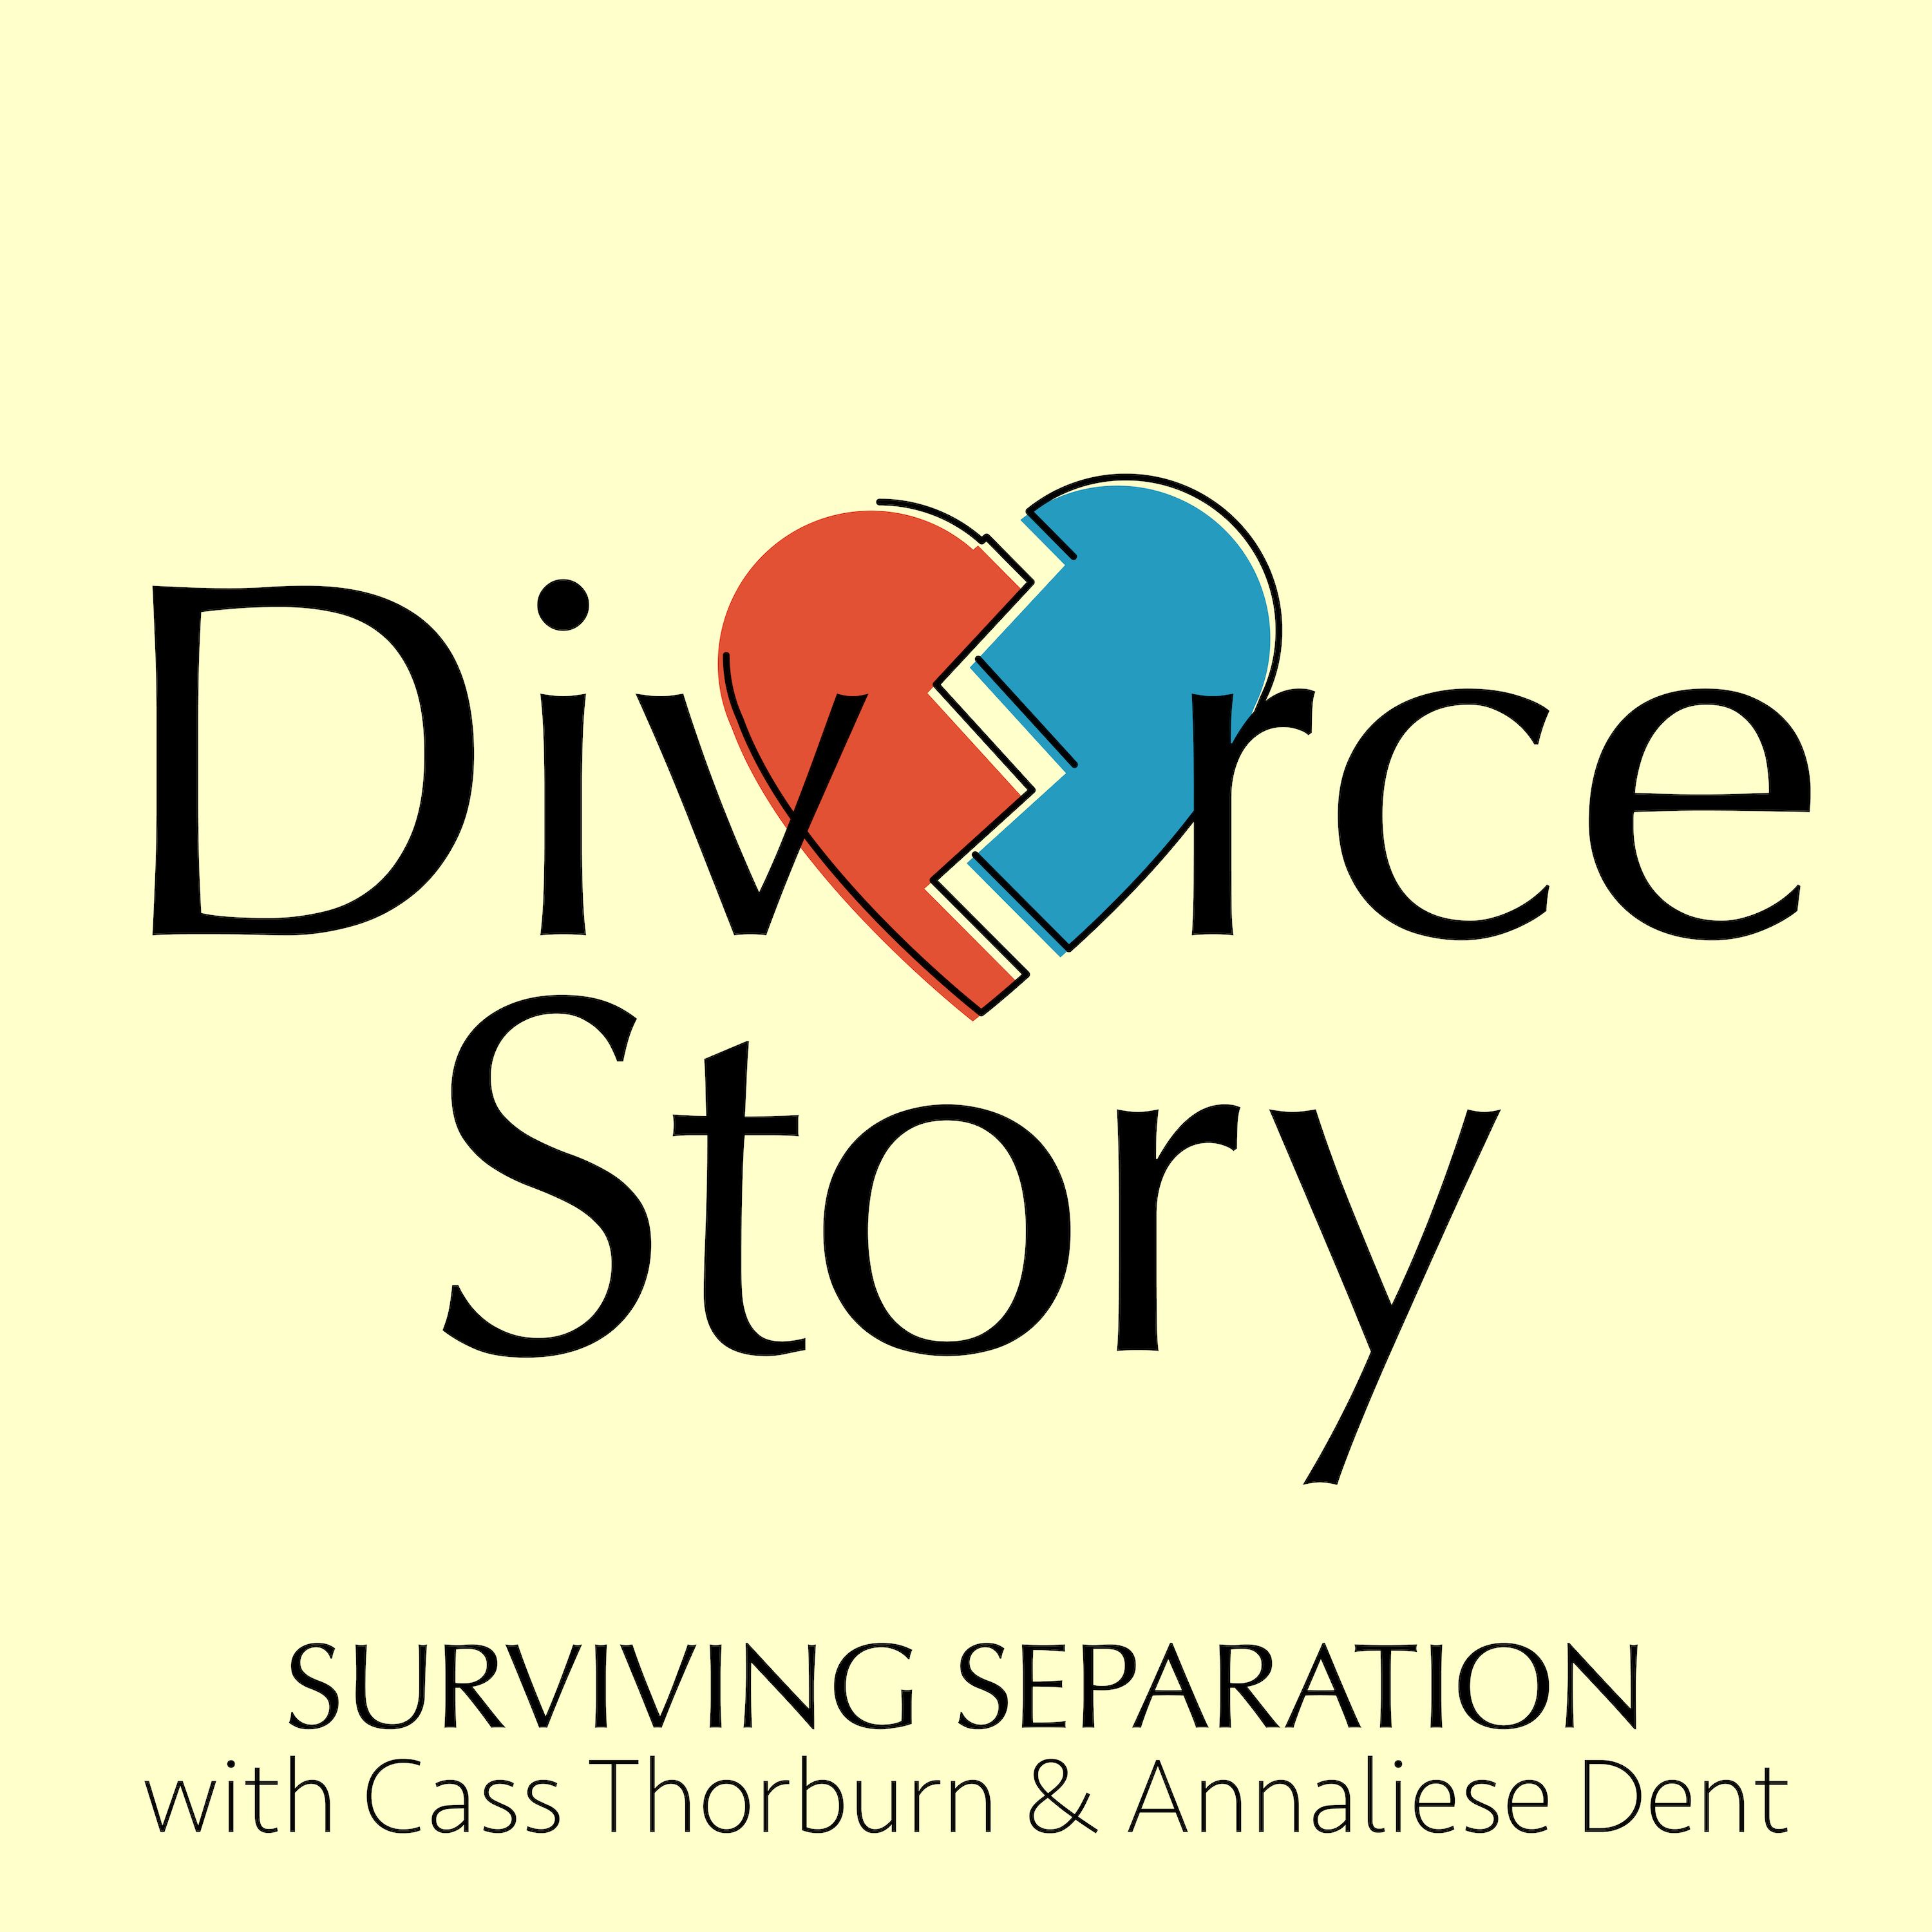 Divorce Story - Divorce Story...coming March 4